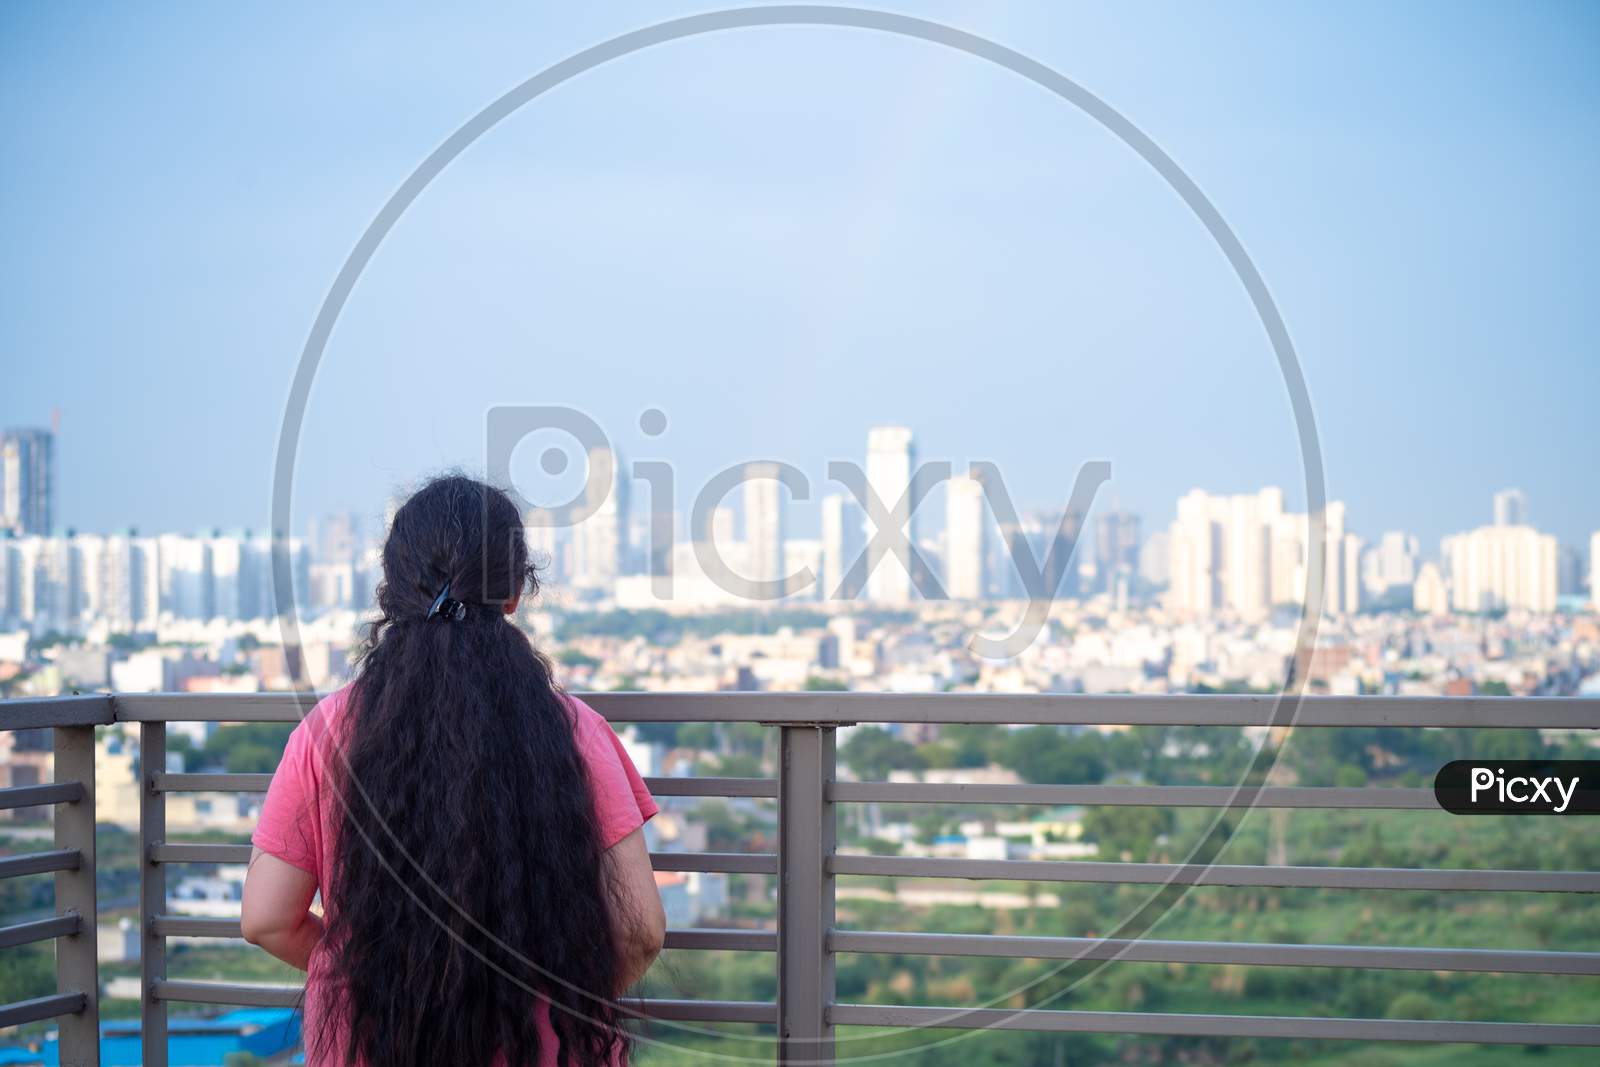 Zoomed In Shot Of Indian Woman With Long Hair In Front Of Huge Towers Skyscrapers Buildings With Offices Homes And Shopping Malls In Gurgaon Showing The Real Estate And Property While The Woman Looks Up In Amazement